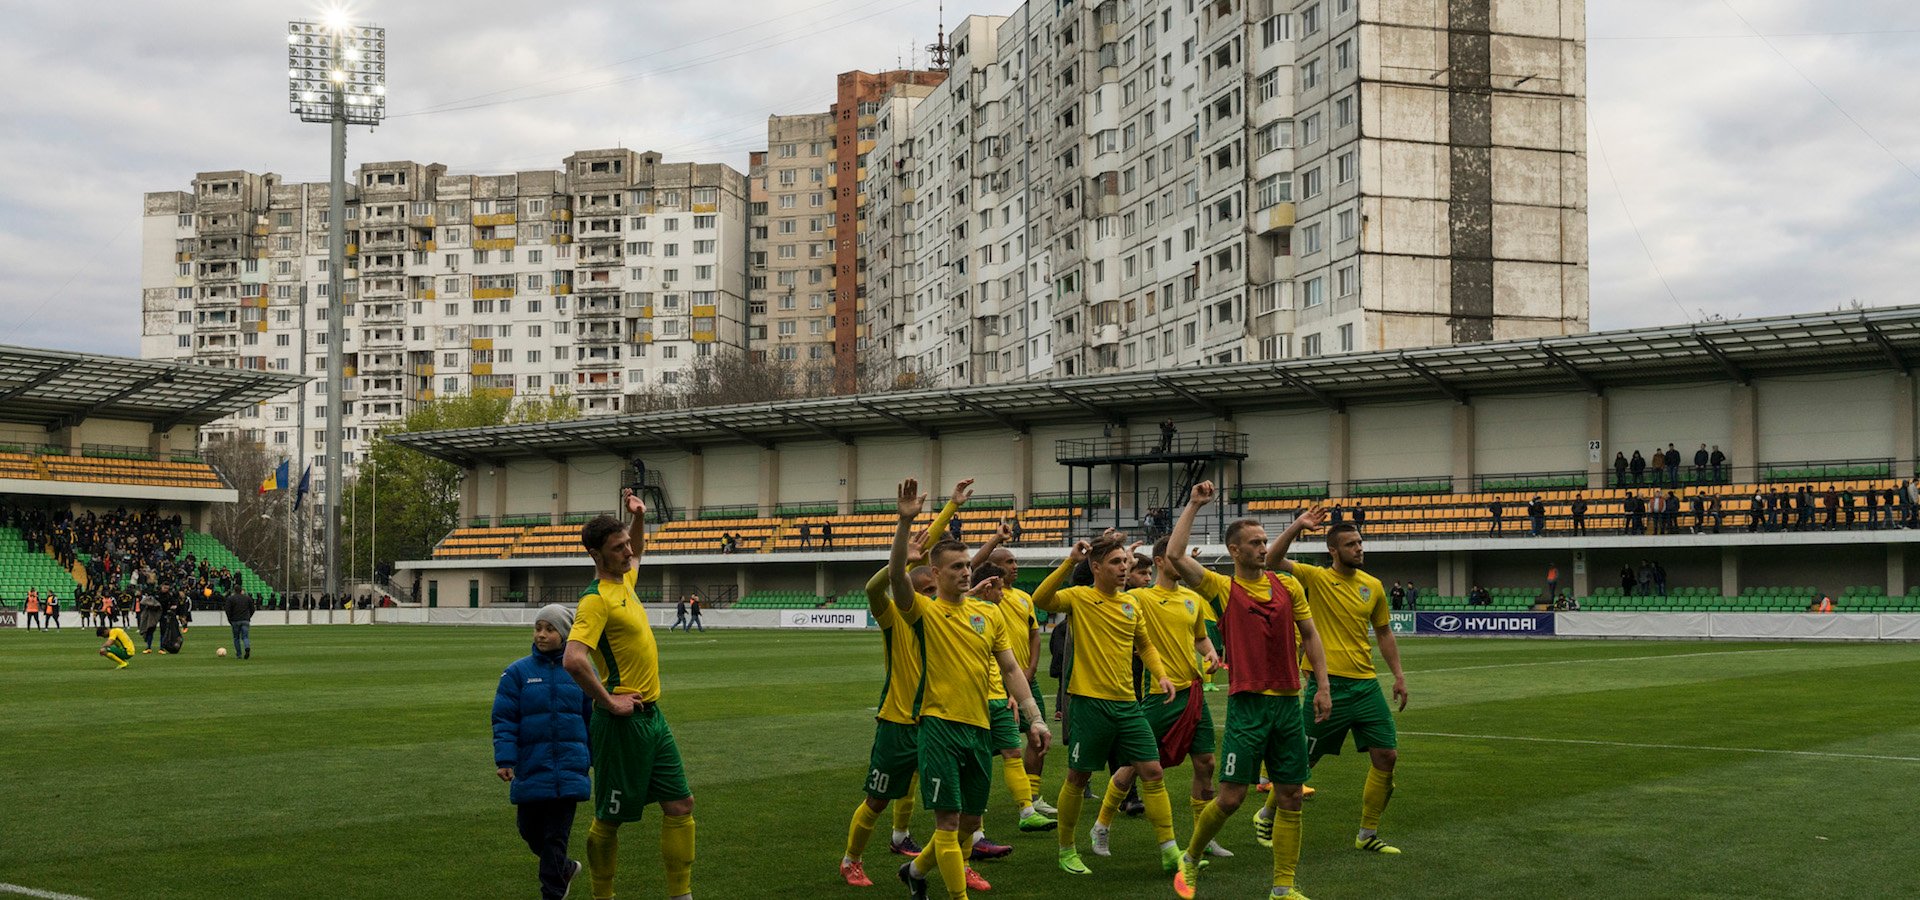 The controversies behind the Champions League underdog, Sheriff Tiraspol — explained